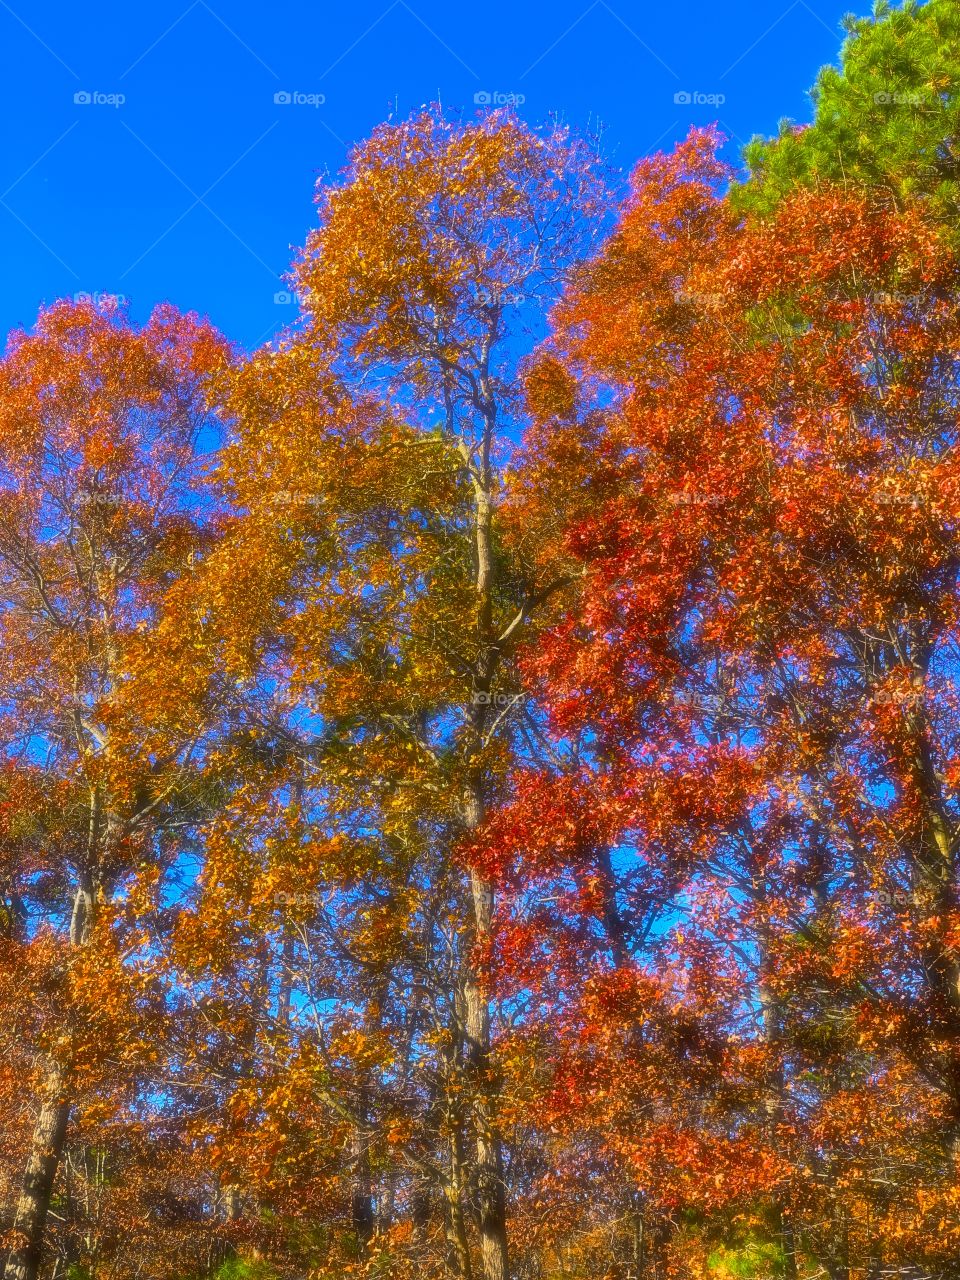 Leaves changing color on a crisp, sunny autumn day